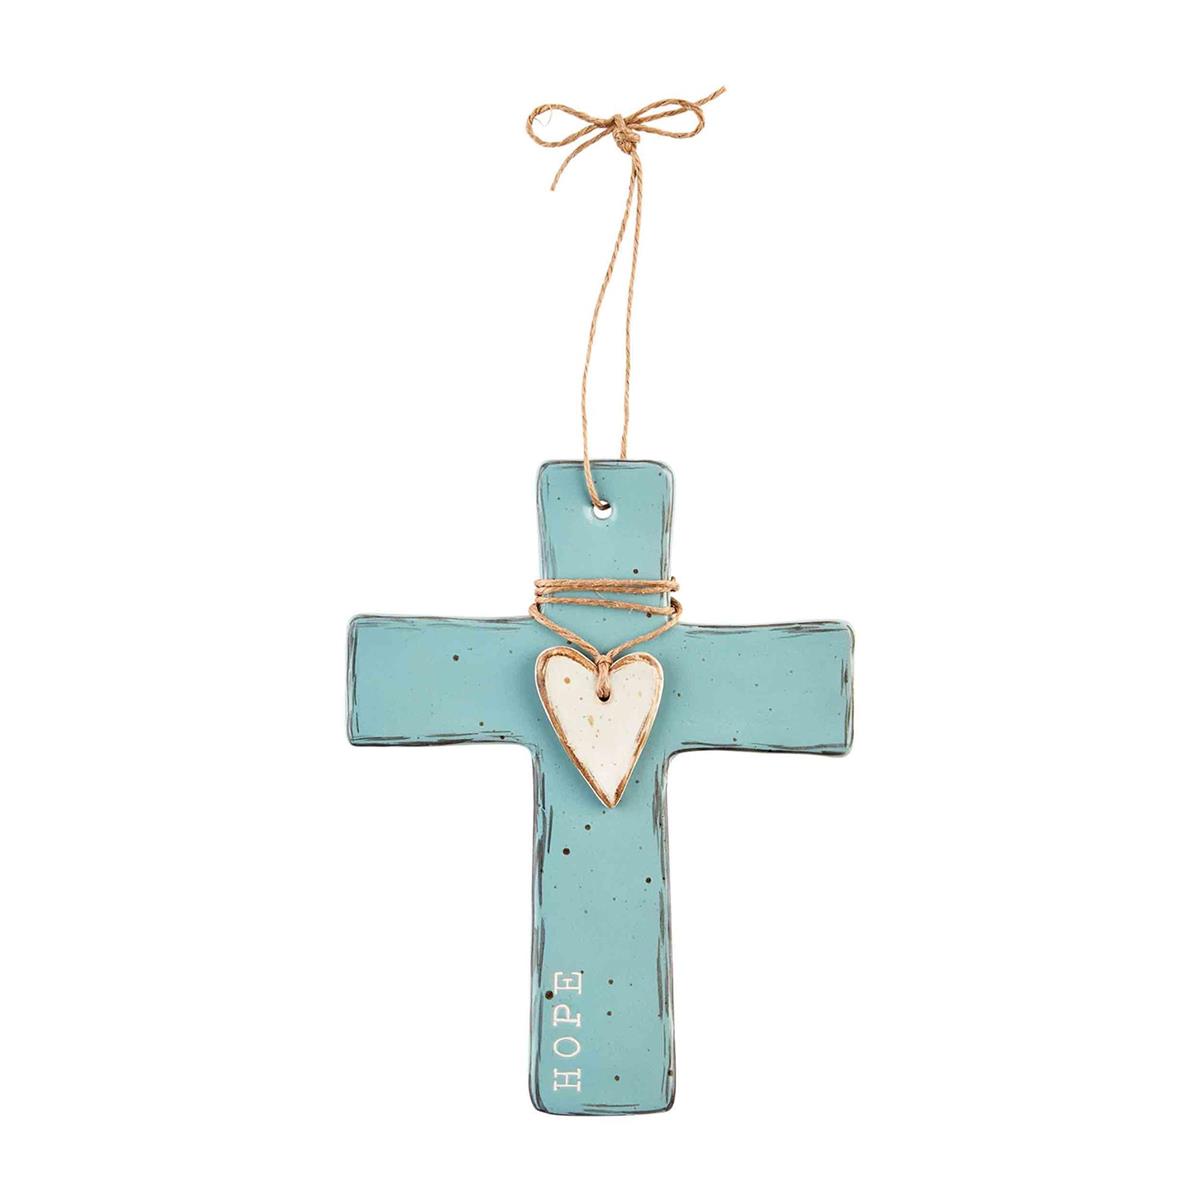 blue cross with white heart and "hope" along the side against a white background